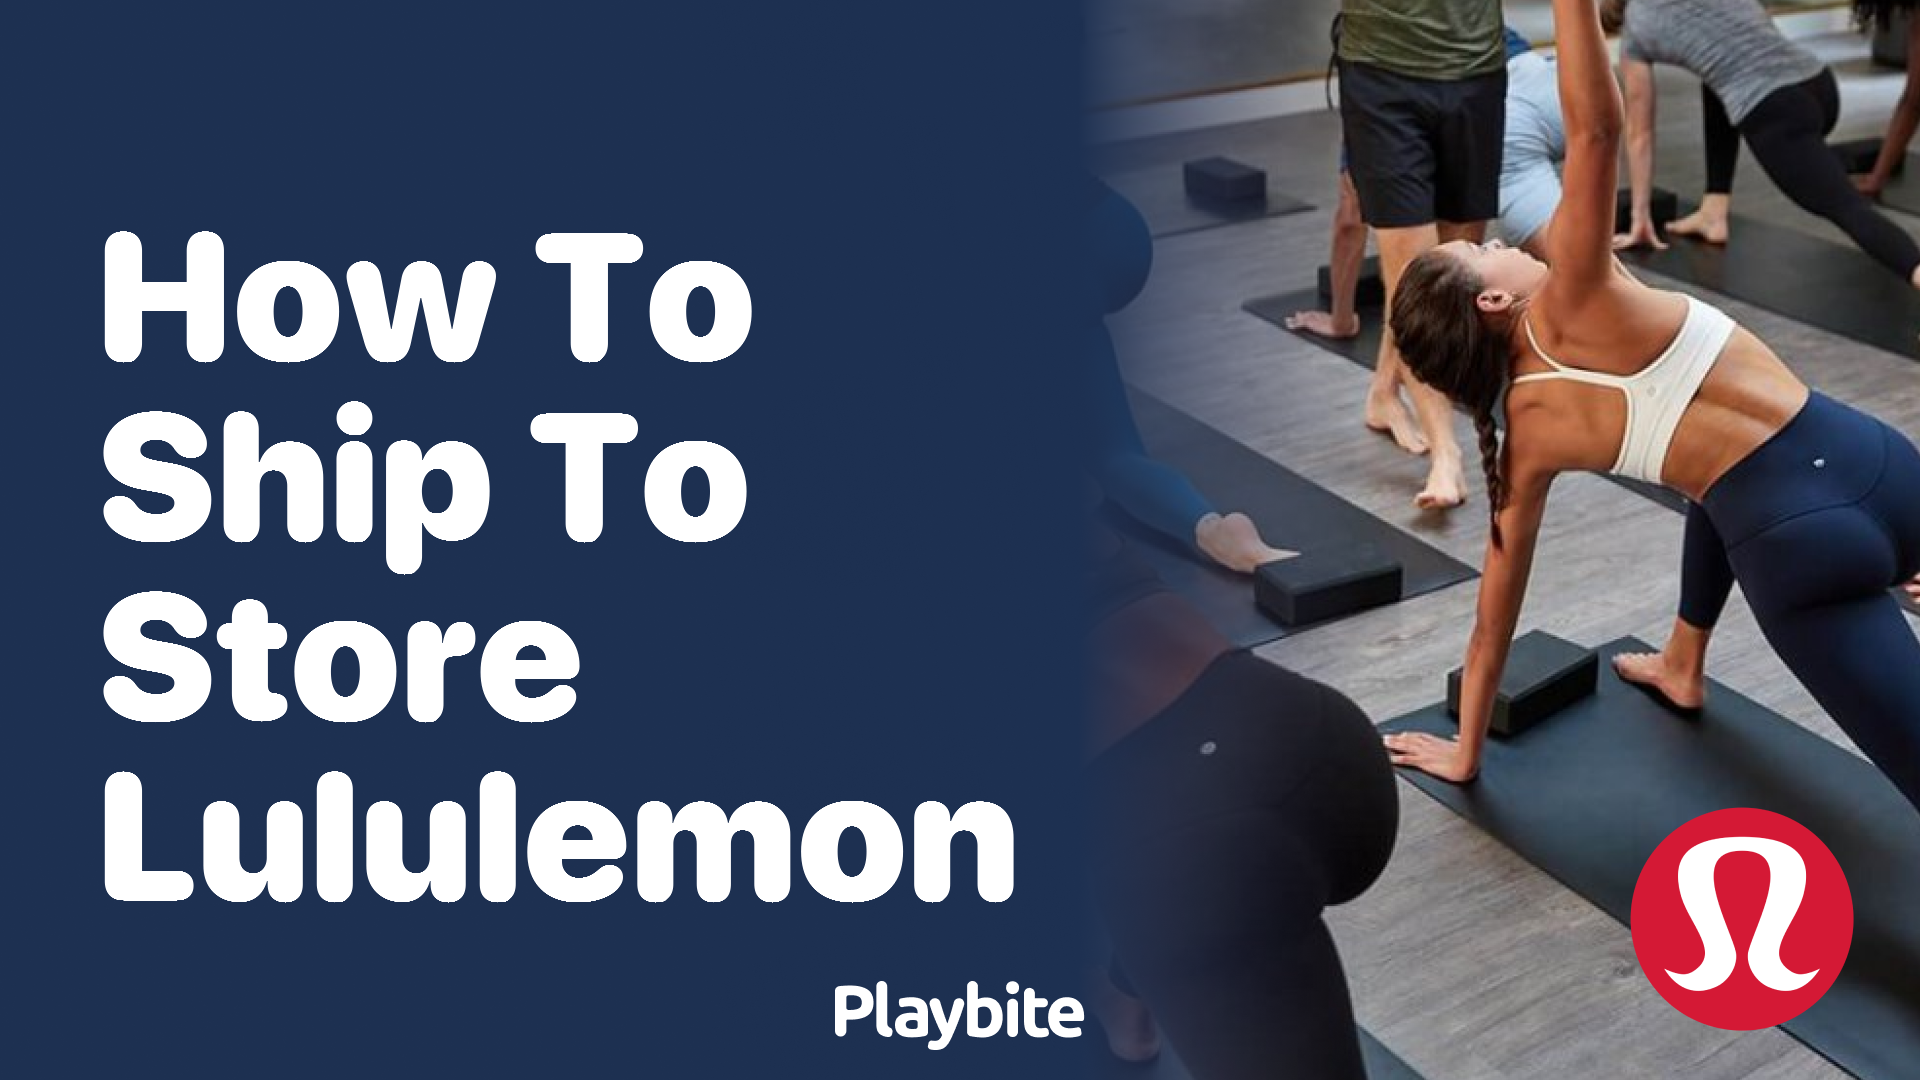 How to Ship to Store Lululemon: A Quick Guide